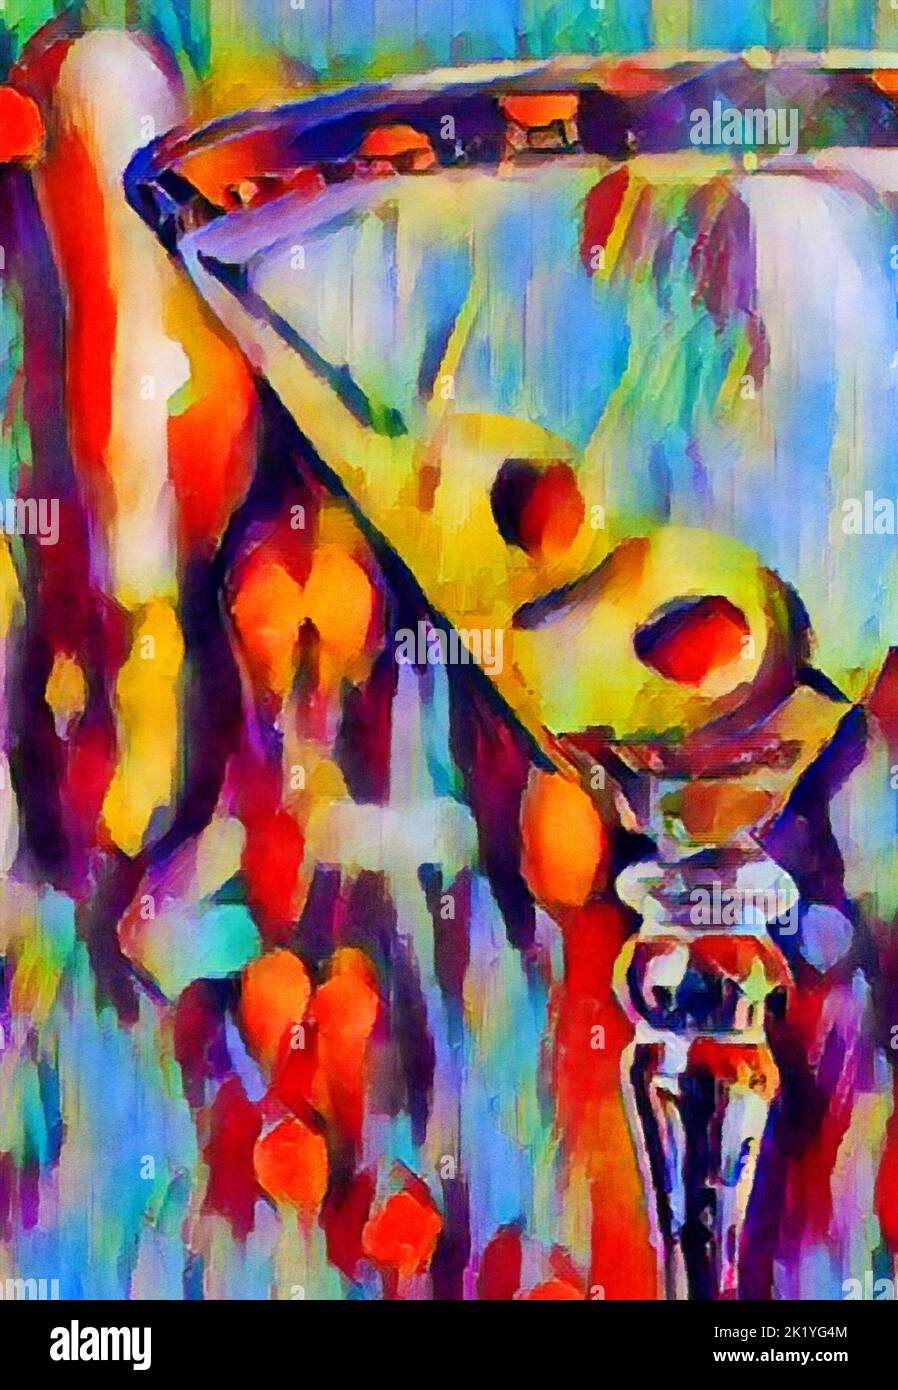 A martini with two olives is seen in an abstract digital watercolor painting. Stock Photo